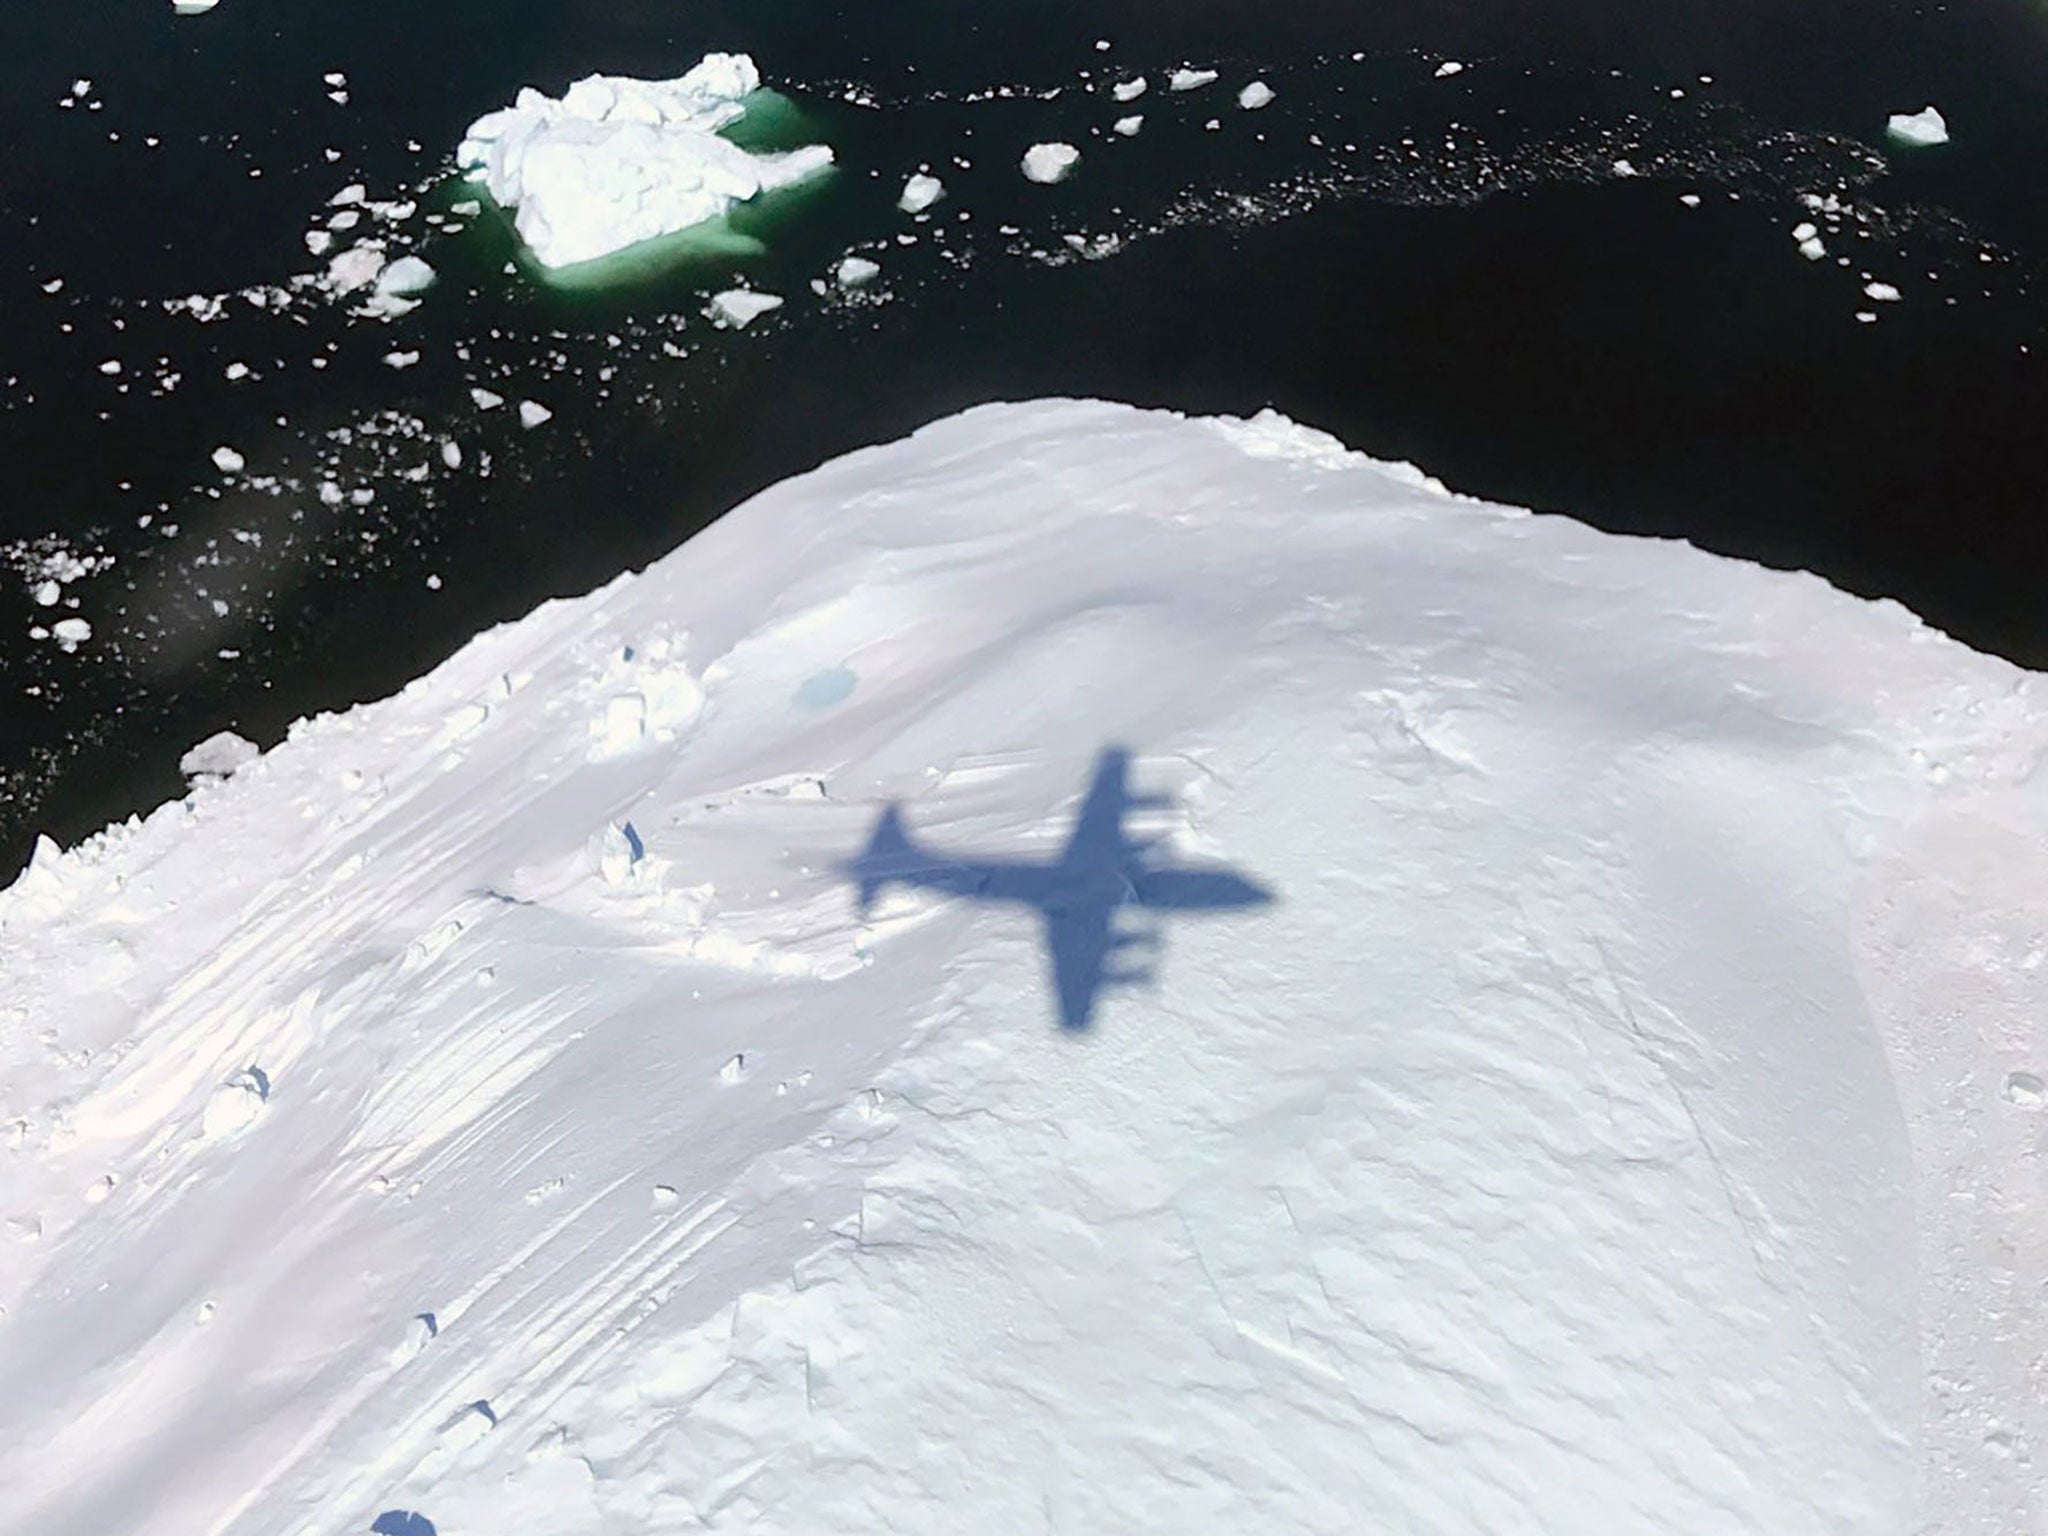 Shadow of a Nasa aircraft on Operation IceBridge, collecting data from changing polar land and sea ice in the Arctic